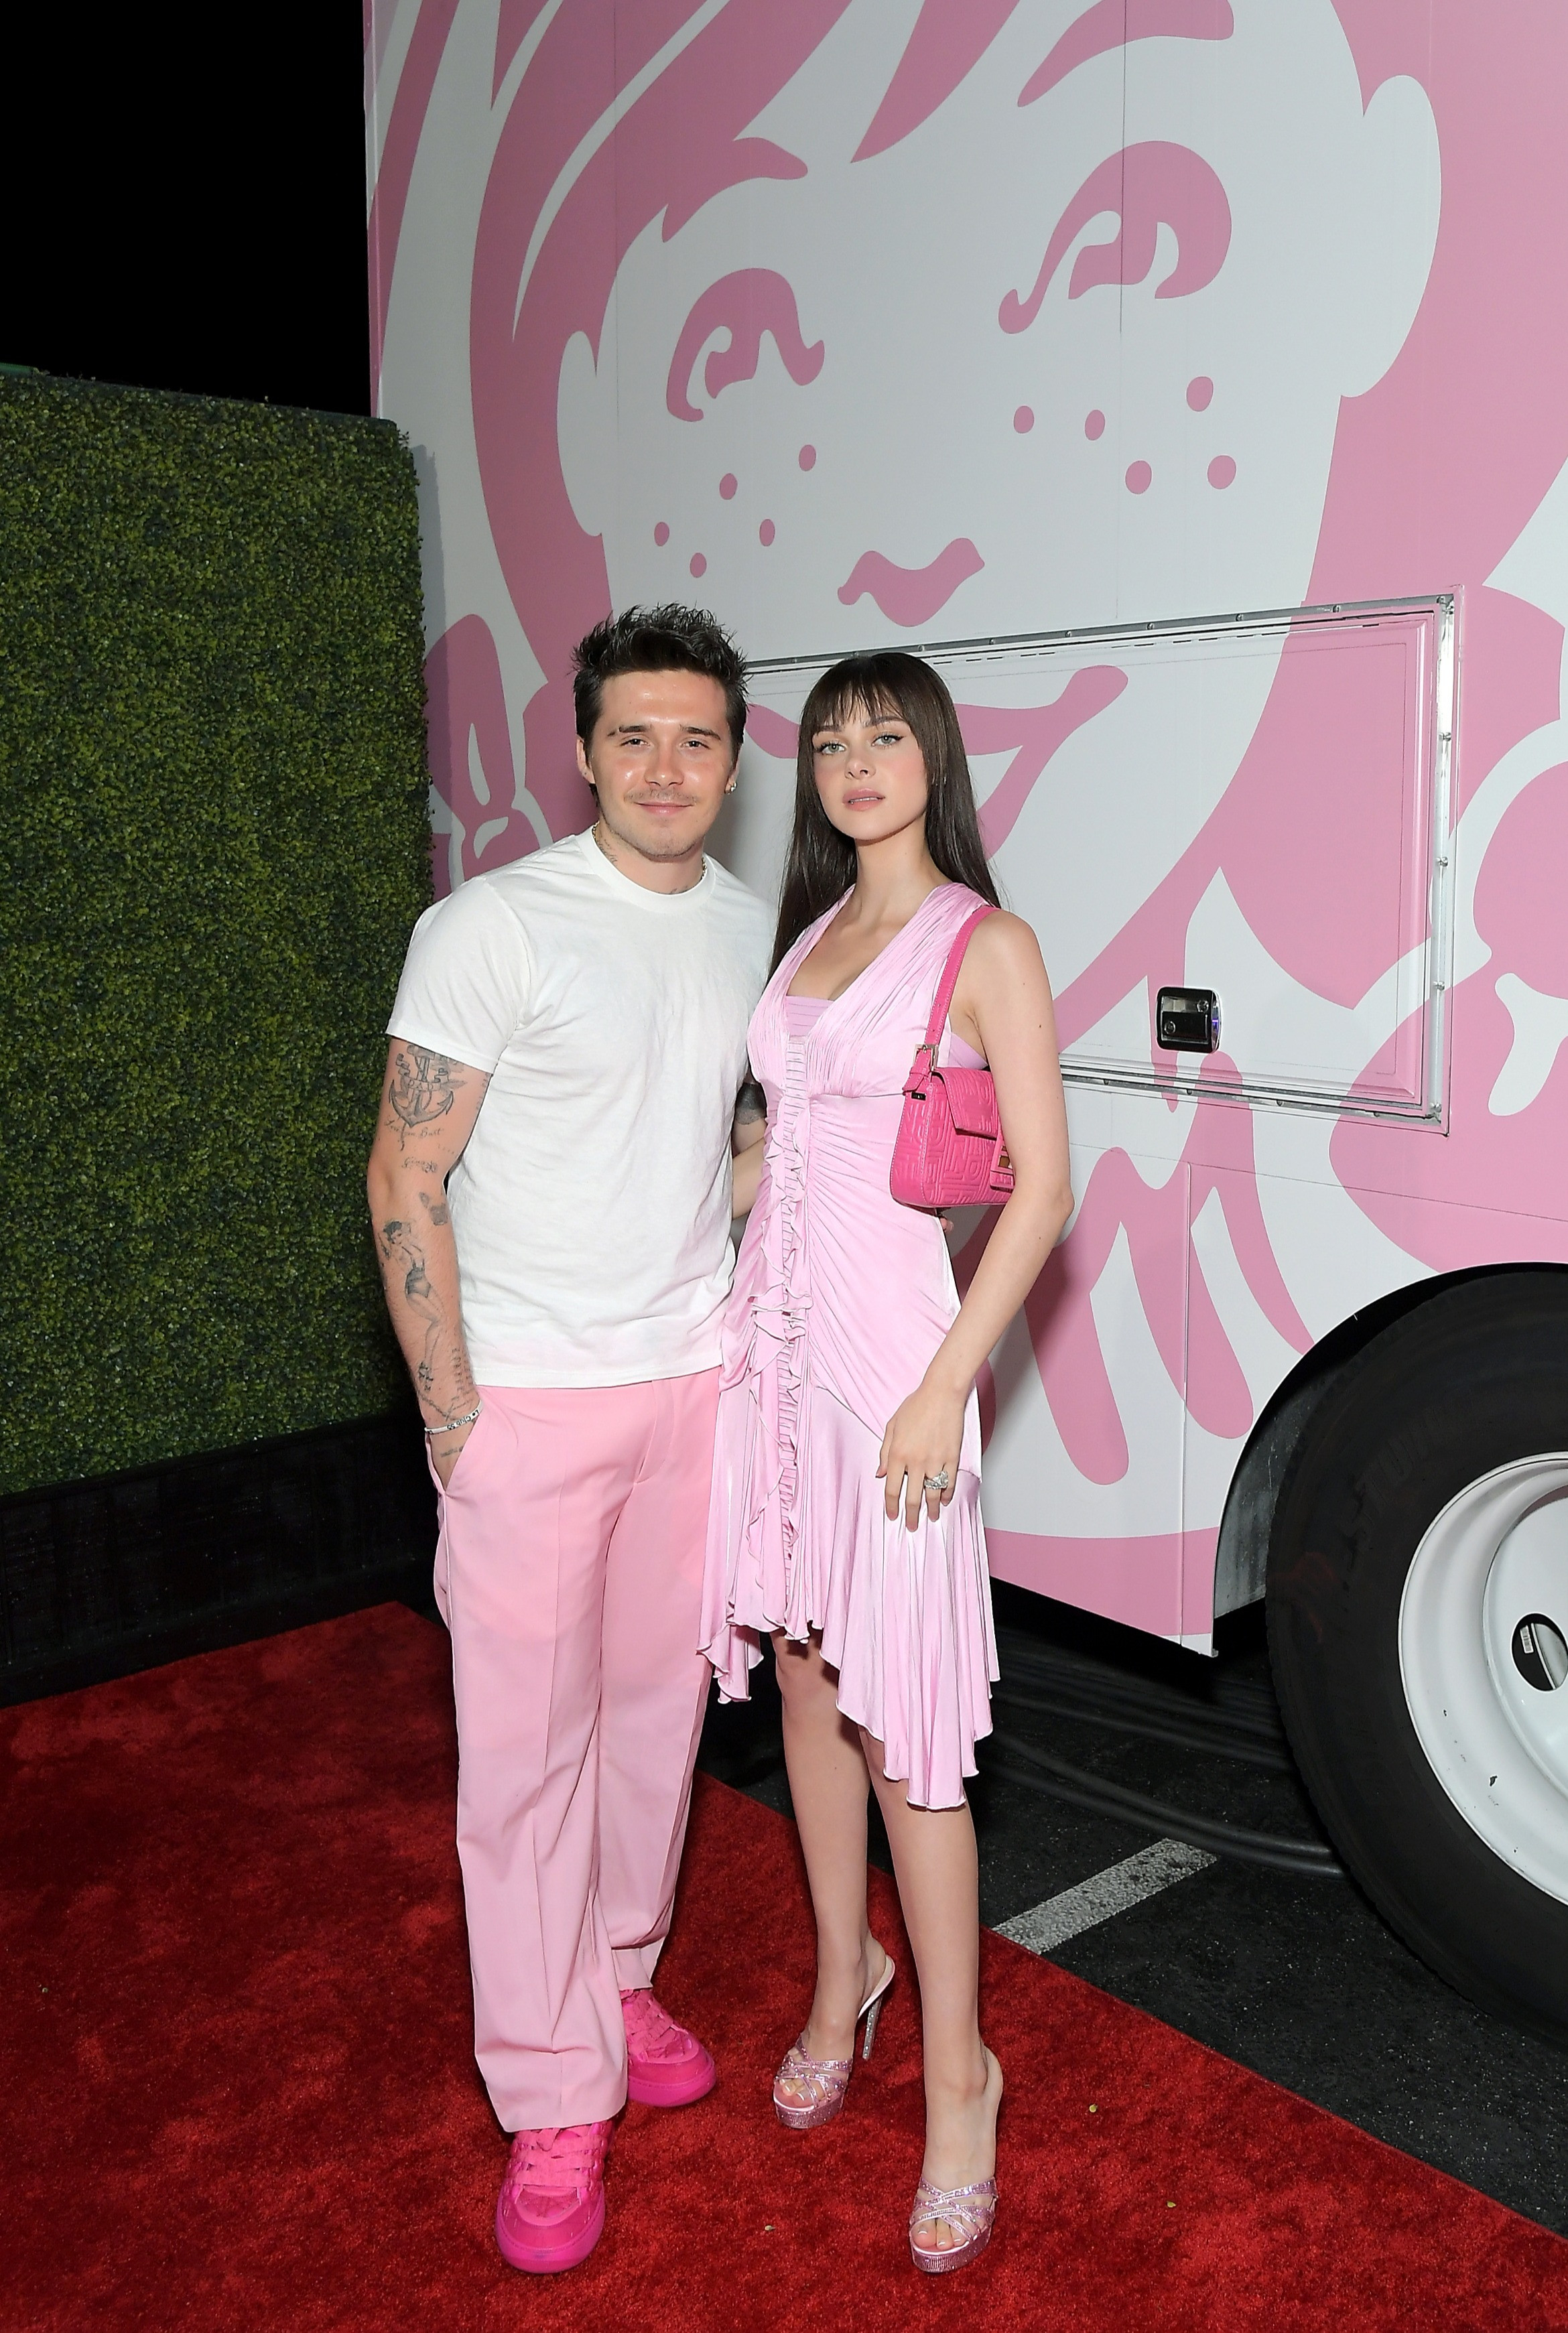 Last month Brooklyn and Nicola wore matching bubblegum pink outfits to attend the launch of the strawberry frosty by US fast-food retailer Wendy's